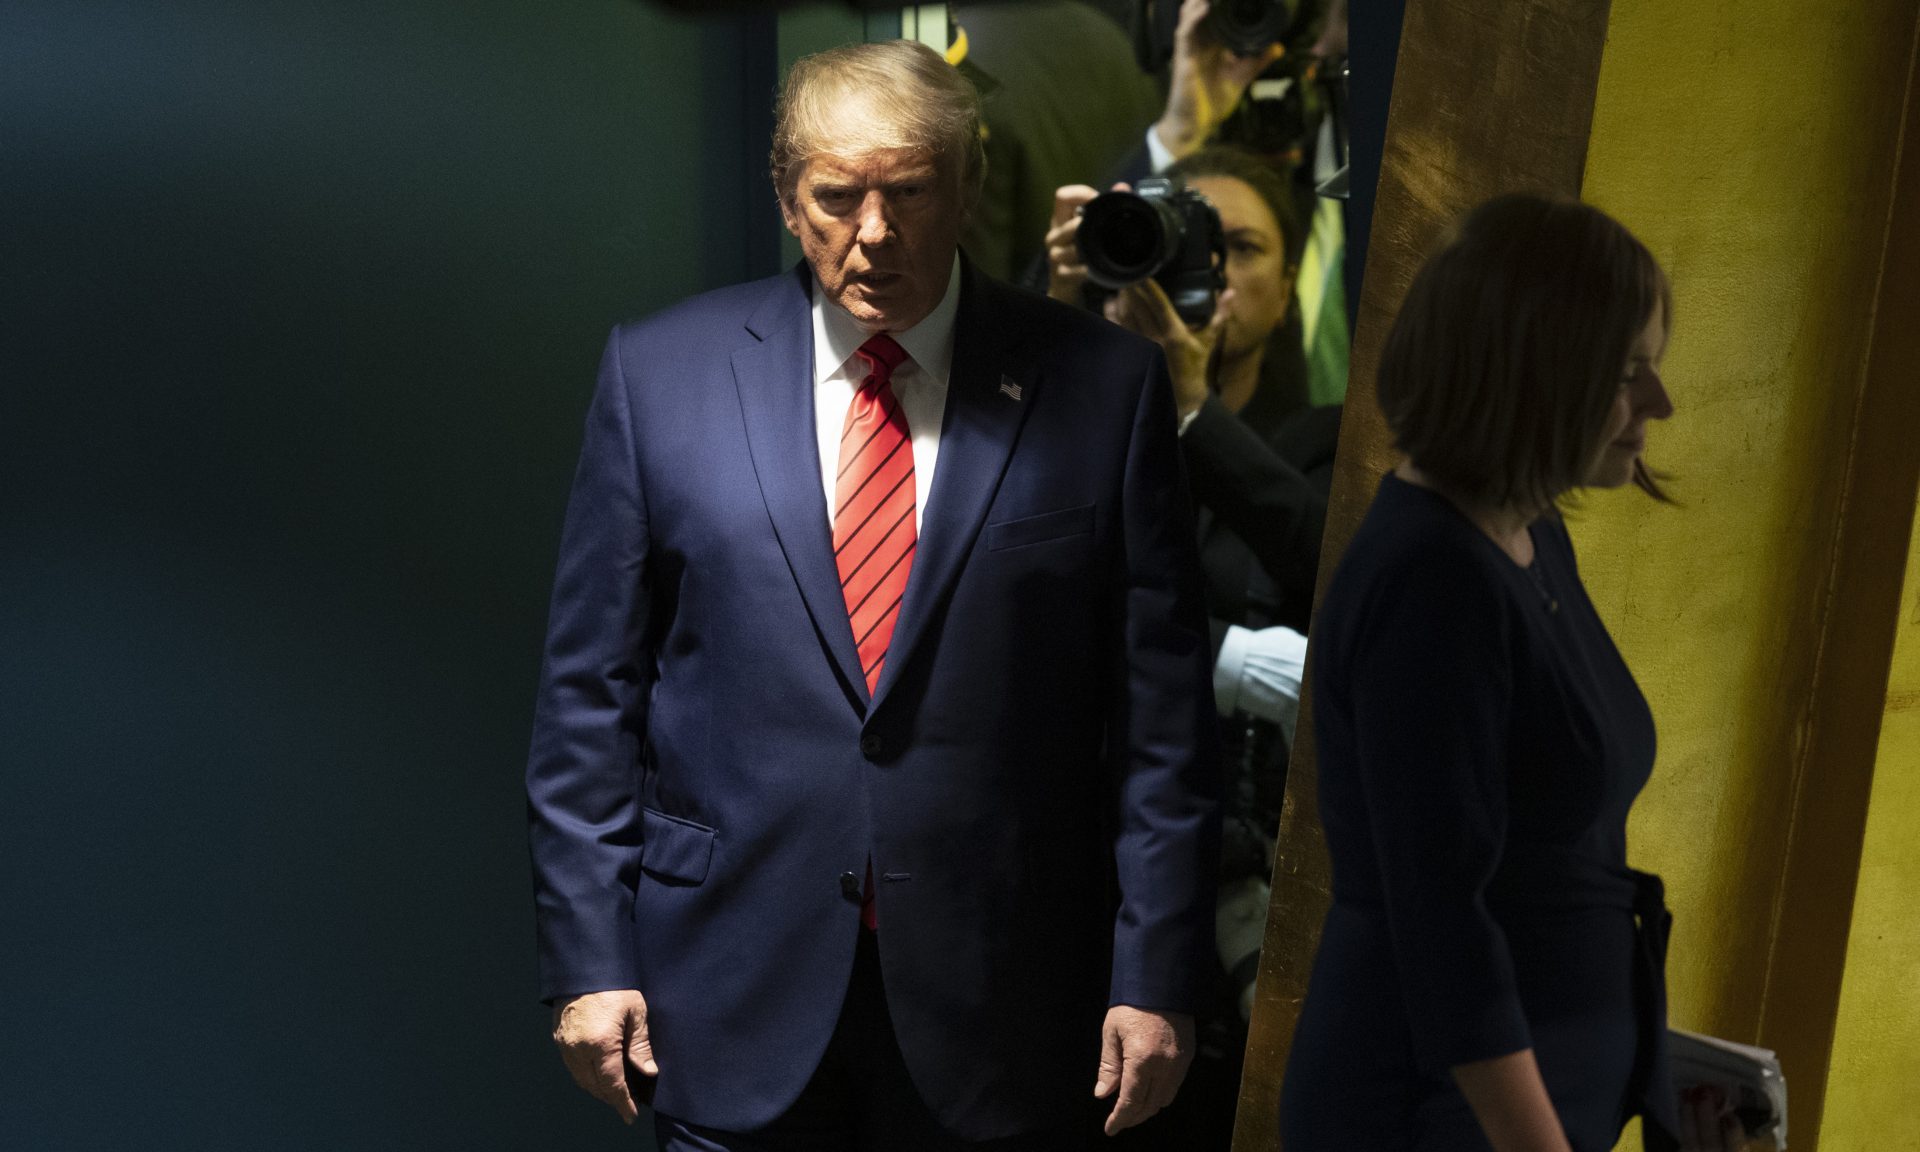 U.S. President Donald Trump arrives to address the 74th session of the United Nations General Assembly at U.N. headquarters Tuesday, Sept. 24, 2019